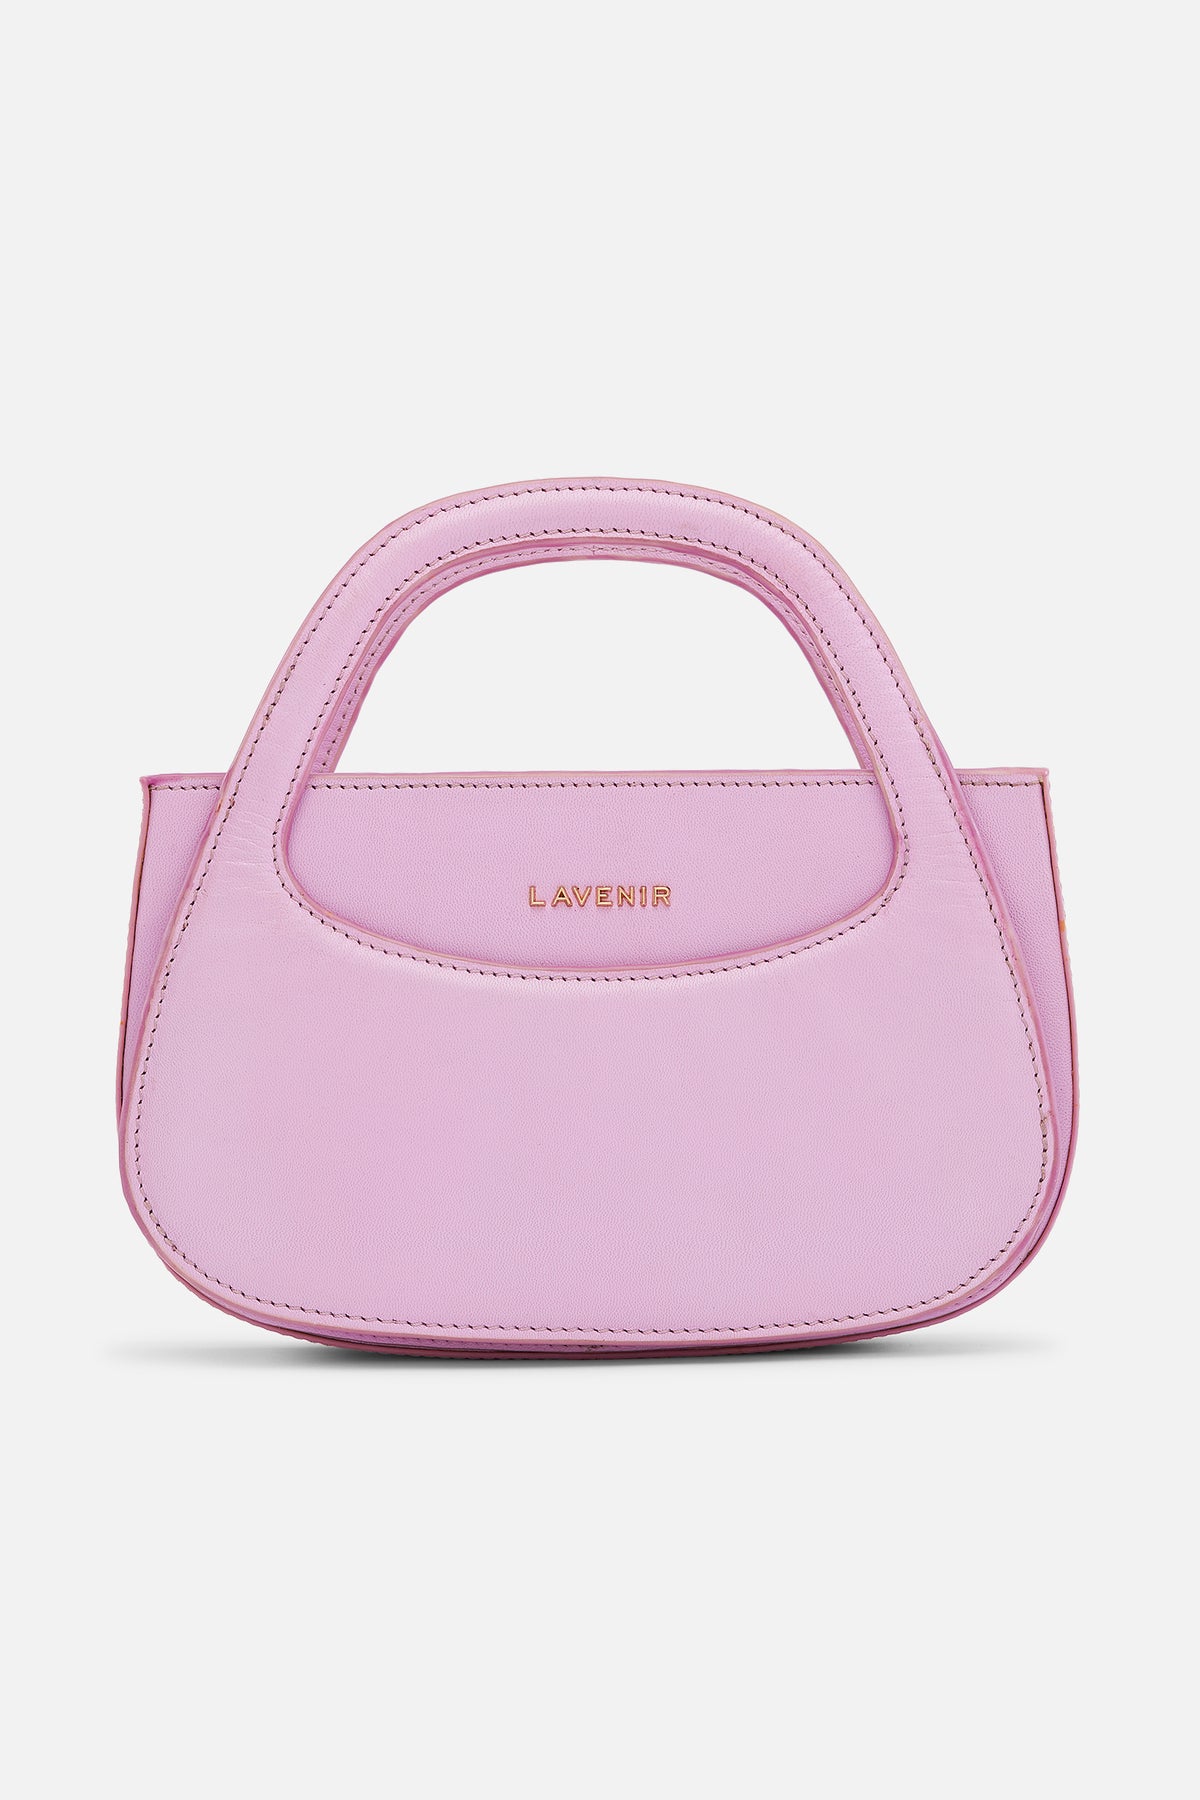 L'avenir - Moon Sling With Additional Pearl handle - Lilac